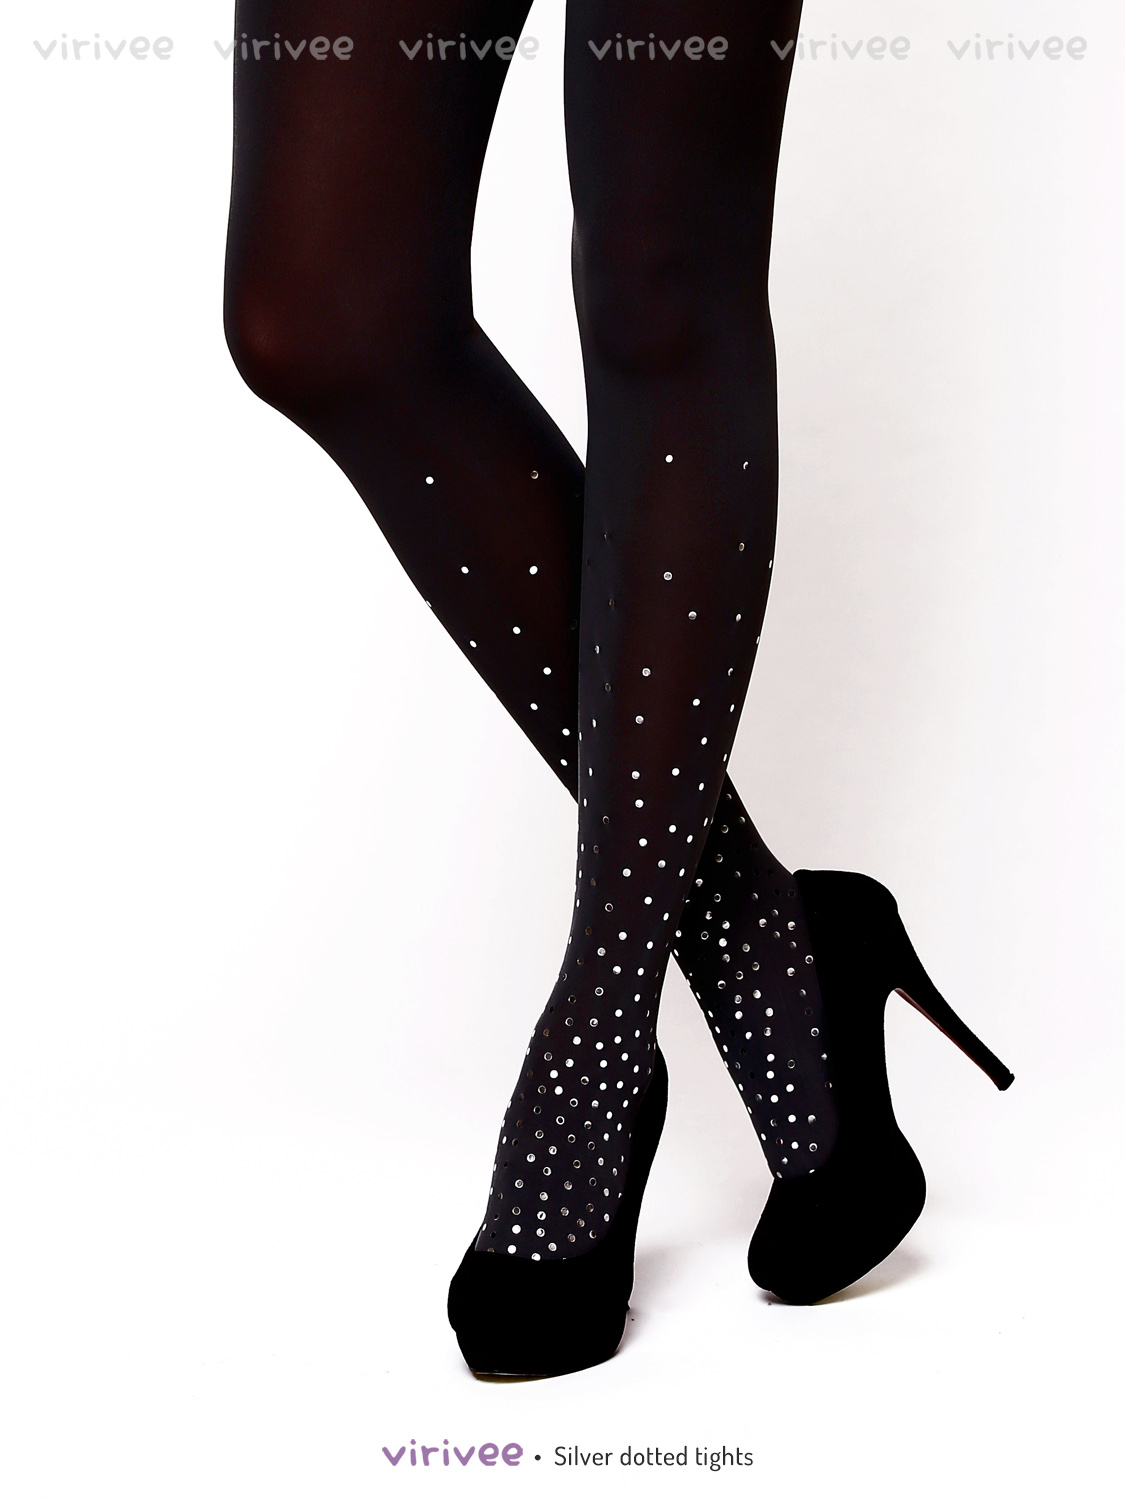 Gold or silver dotted tights